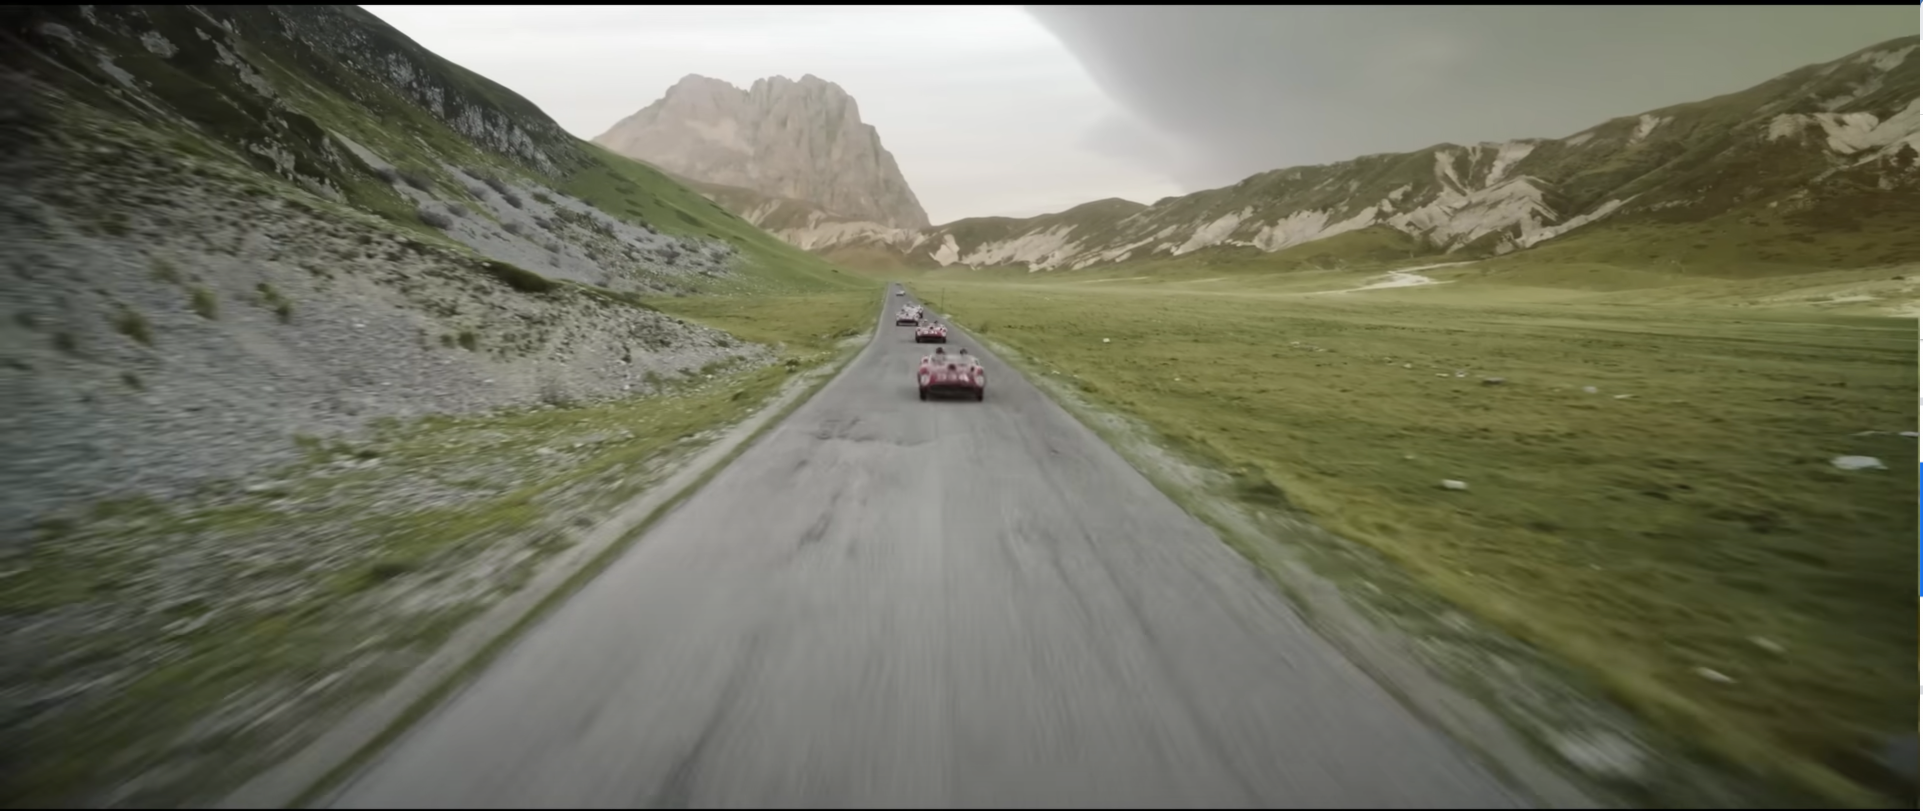 Buckle up for a blockbuster – Michael Mann’s Ferrari looks, and sounds, epic